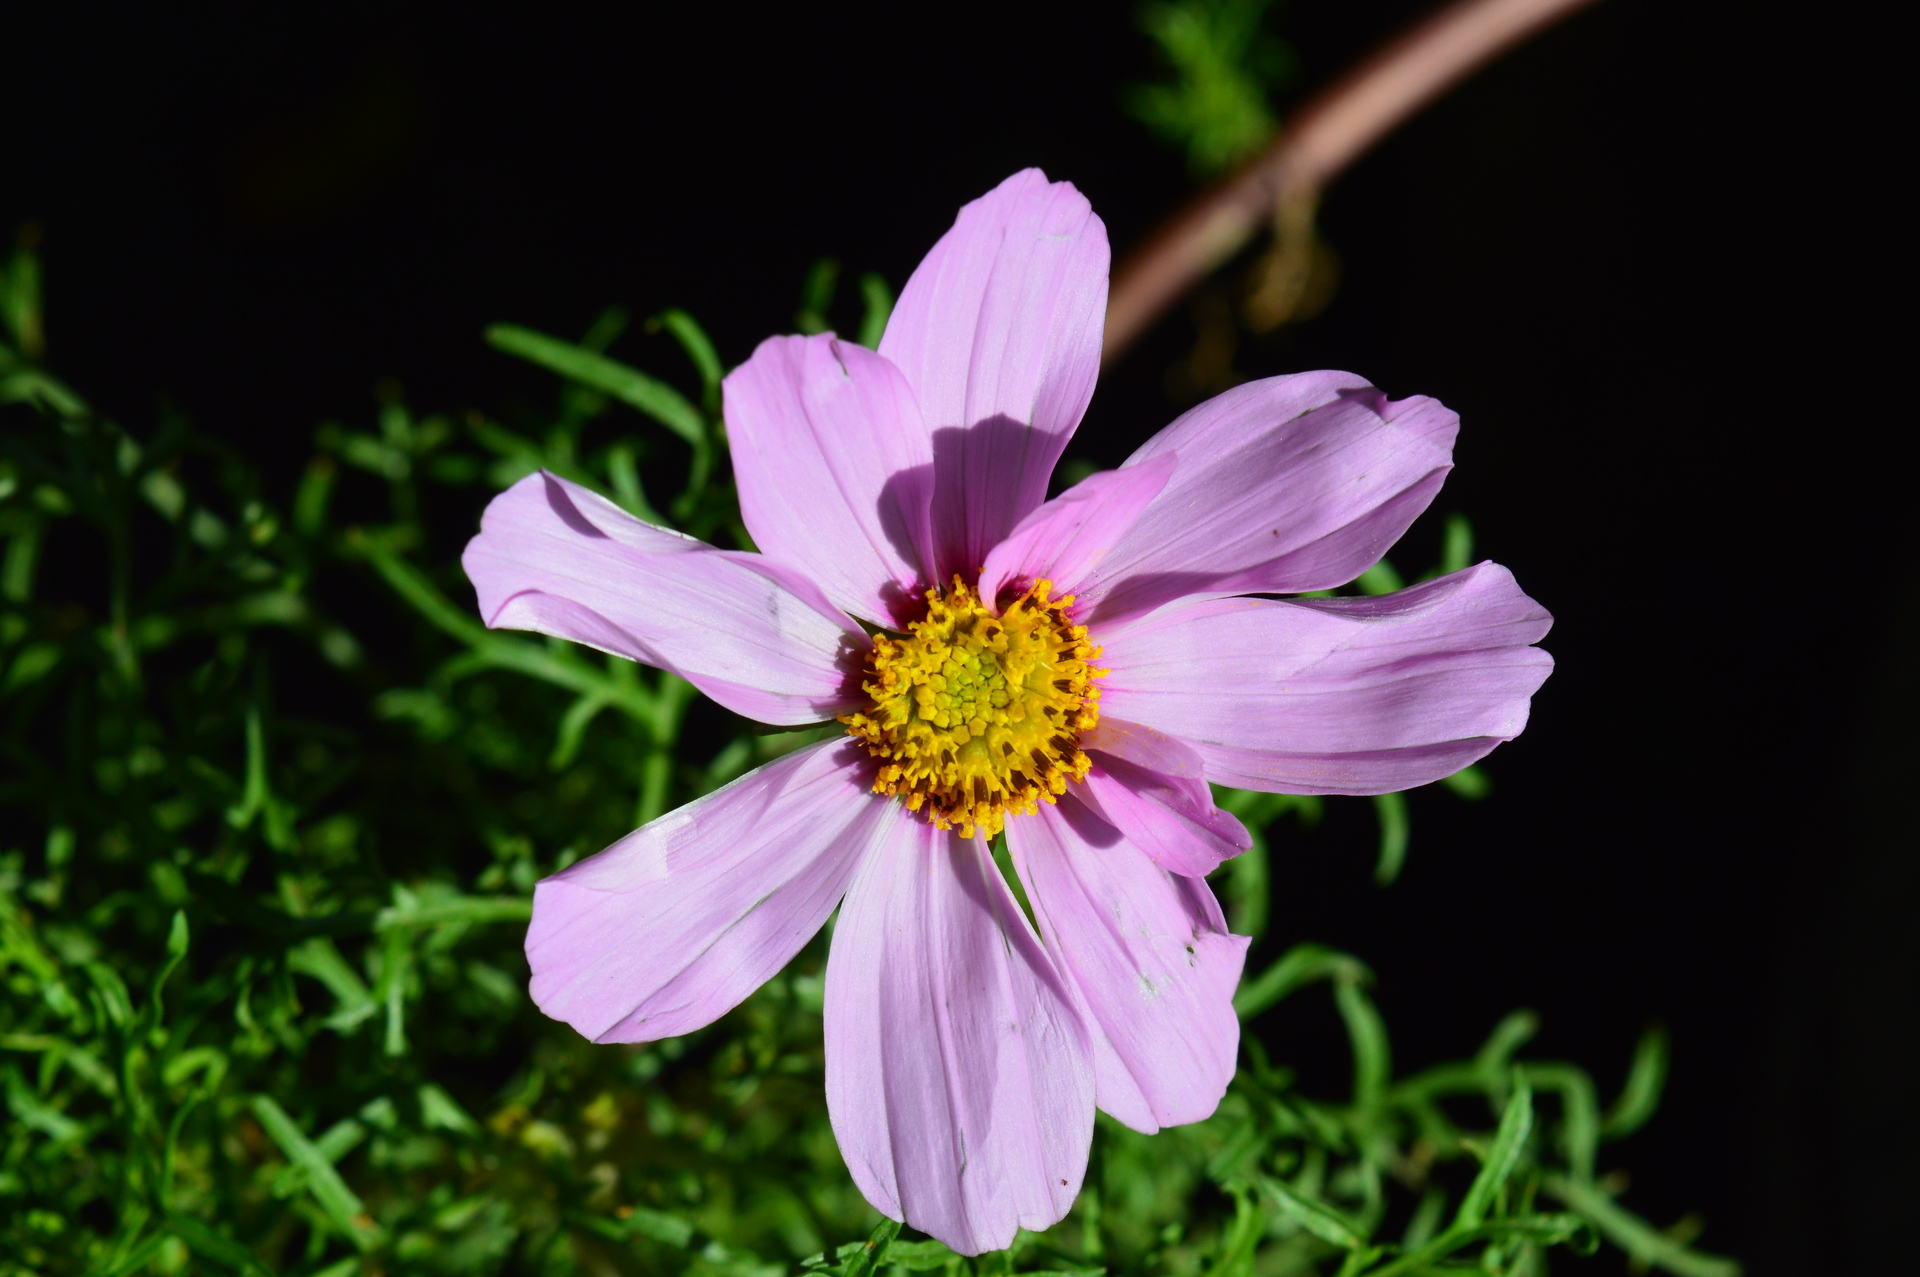 Foap.com: Blooming cosmos flower | nature, outdoors, petal, plant ...